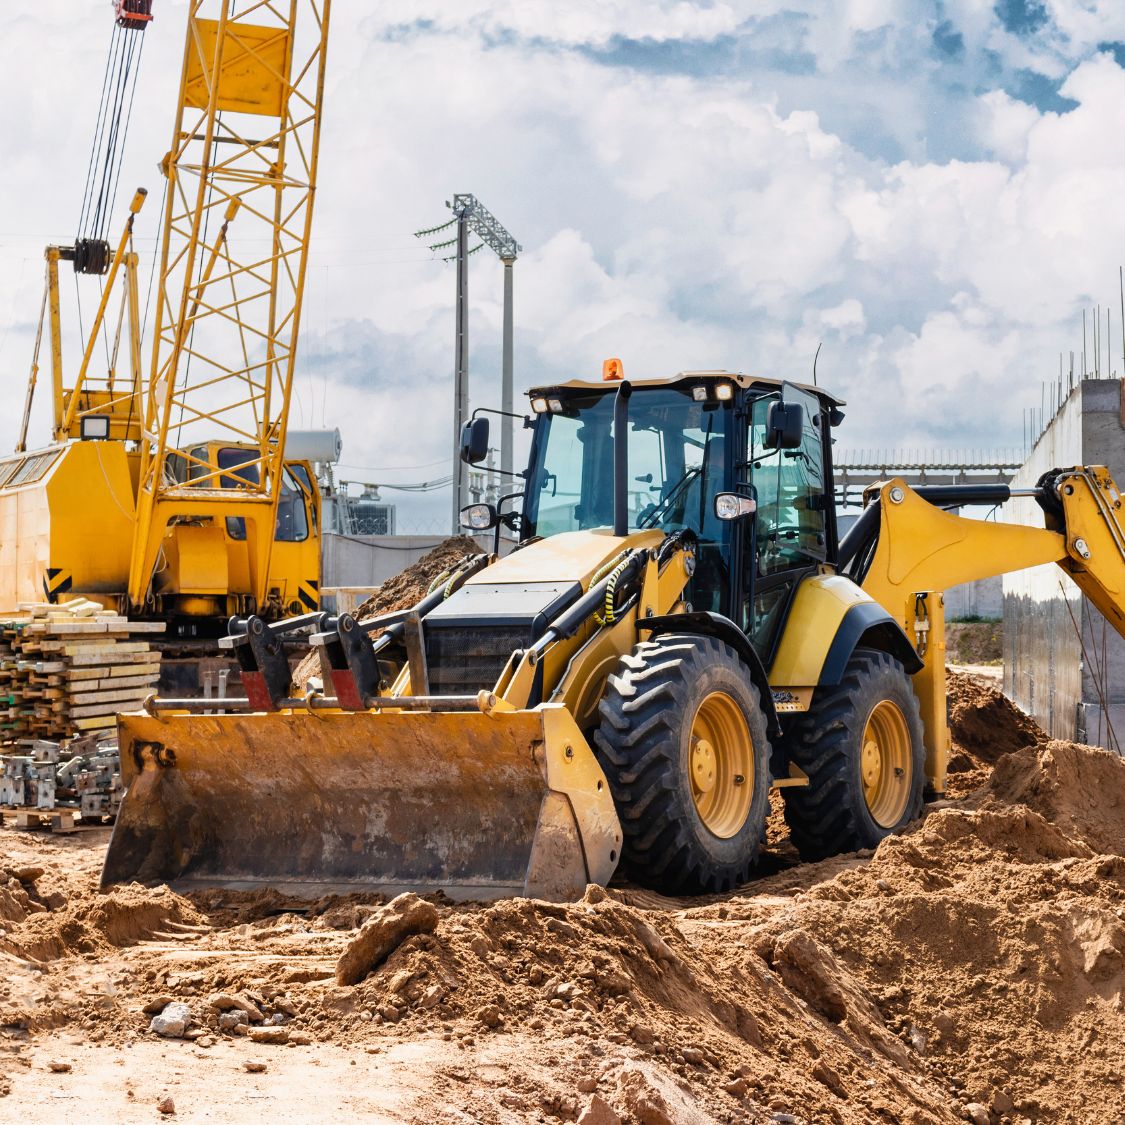 Questions To Ask When You’re Renting Construction Equipment